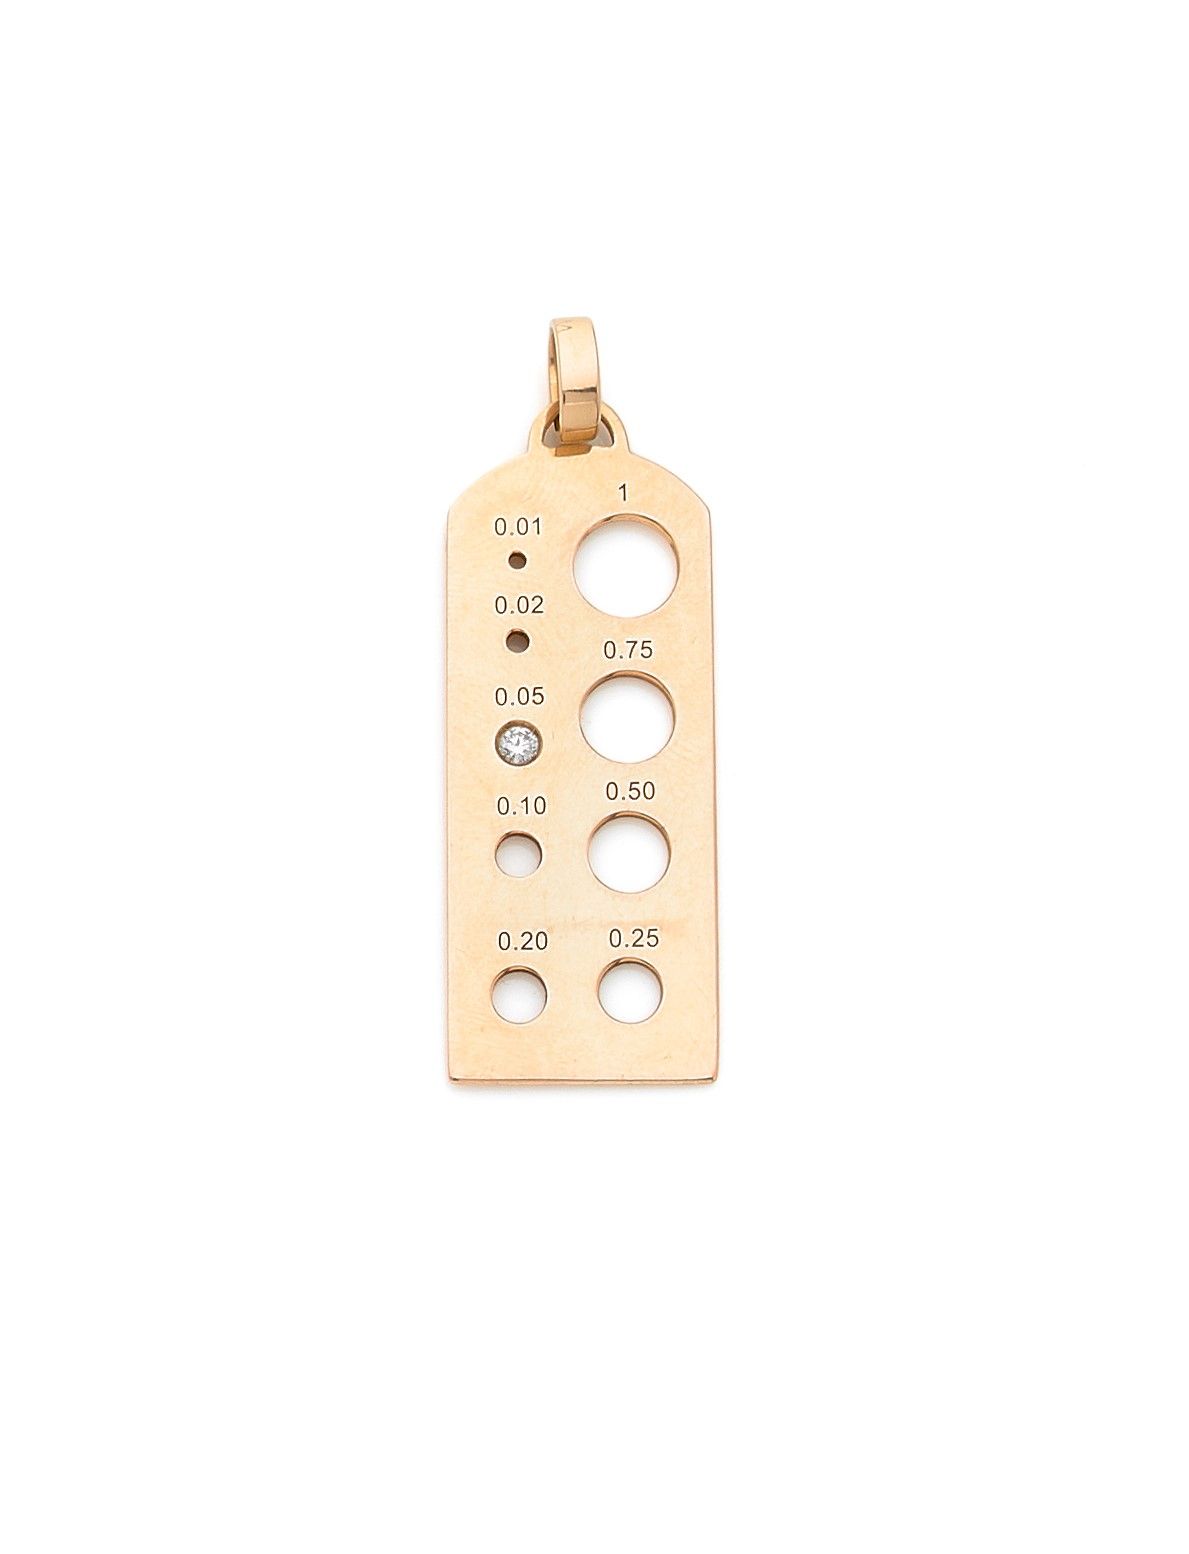 Null FREDPendant
in 18K (750) gold, set with a round brilliant-cut diamond. Sign&hellip;